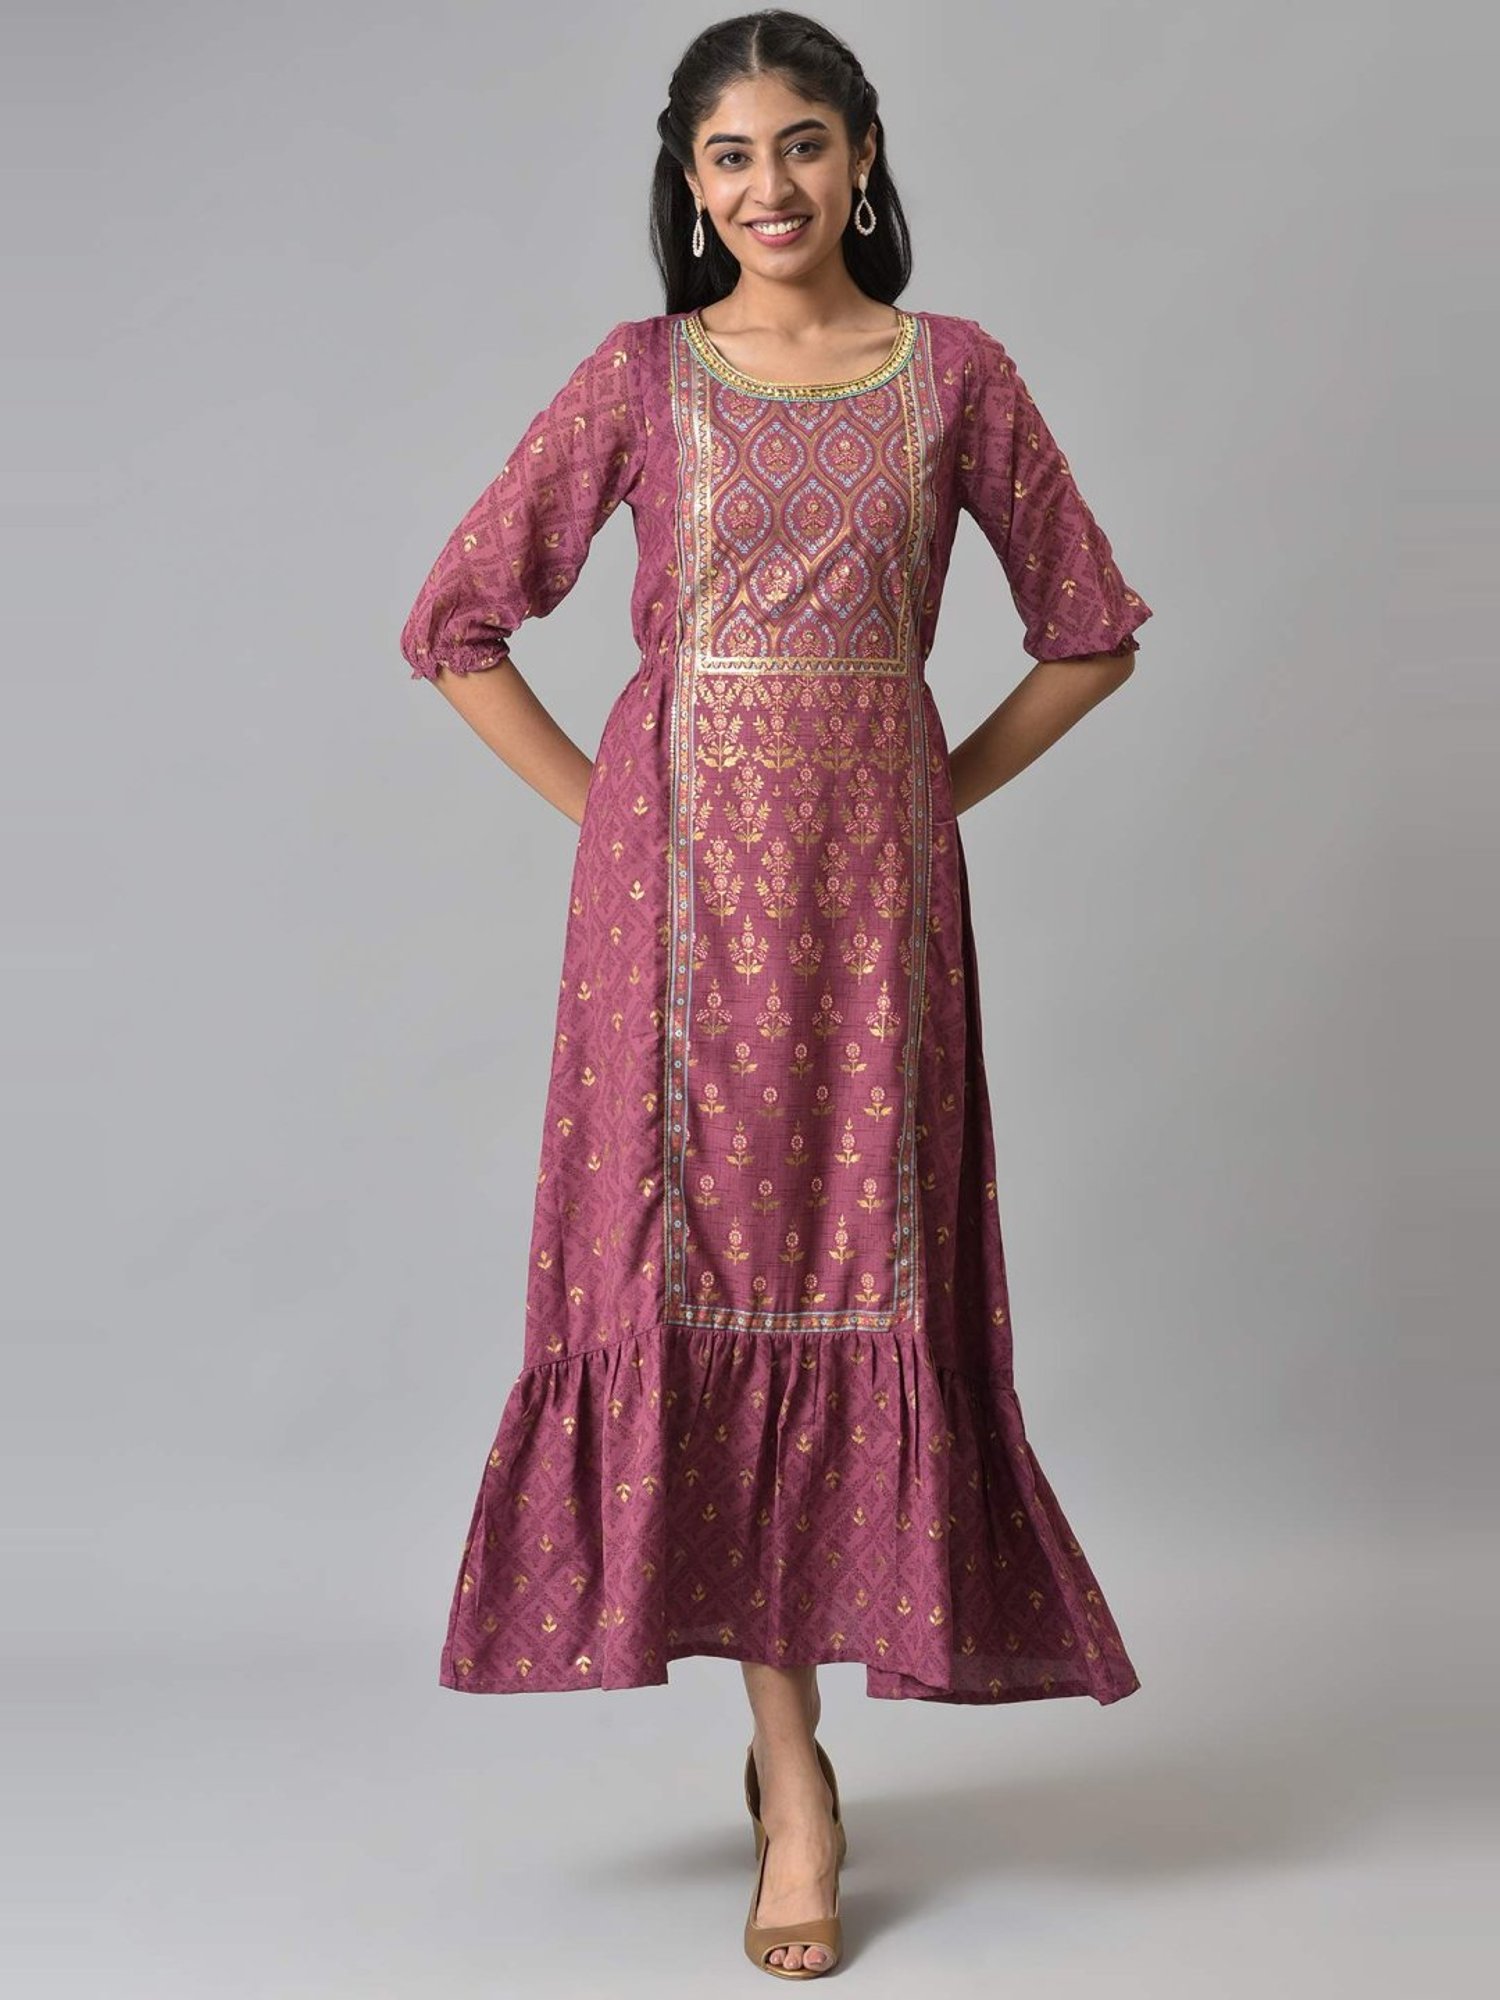 YU by Pantaloons Pink Embroidered A-Line Dress